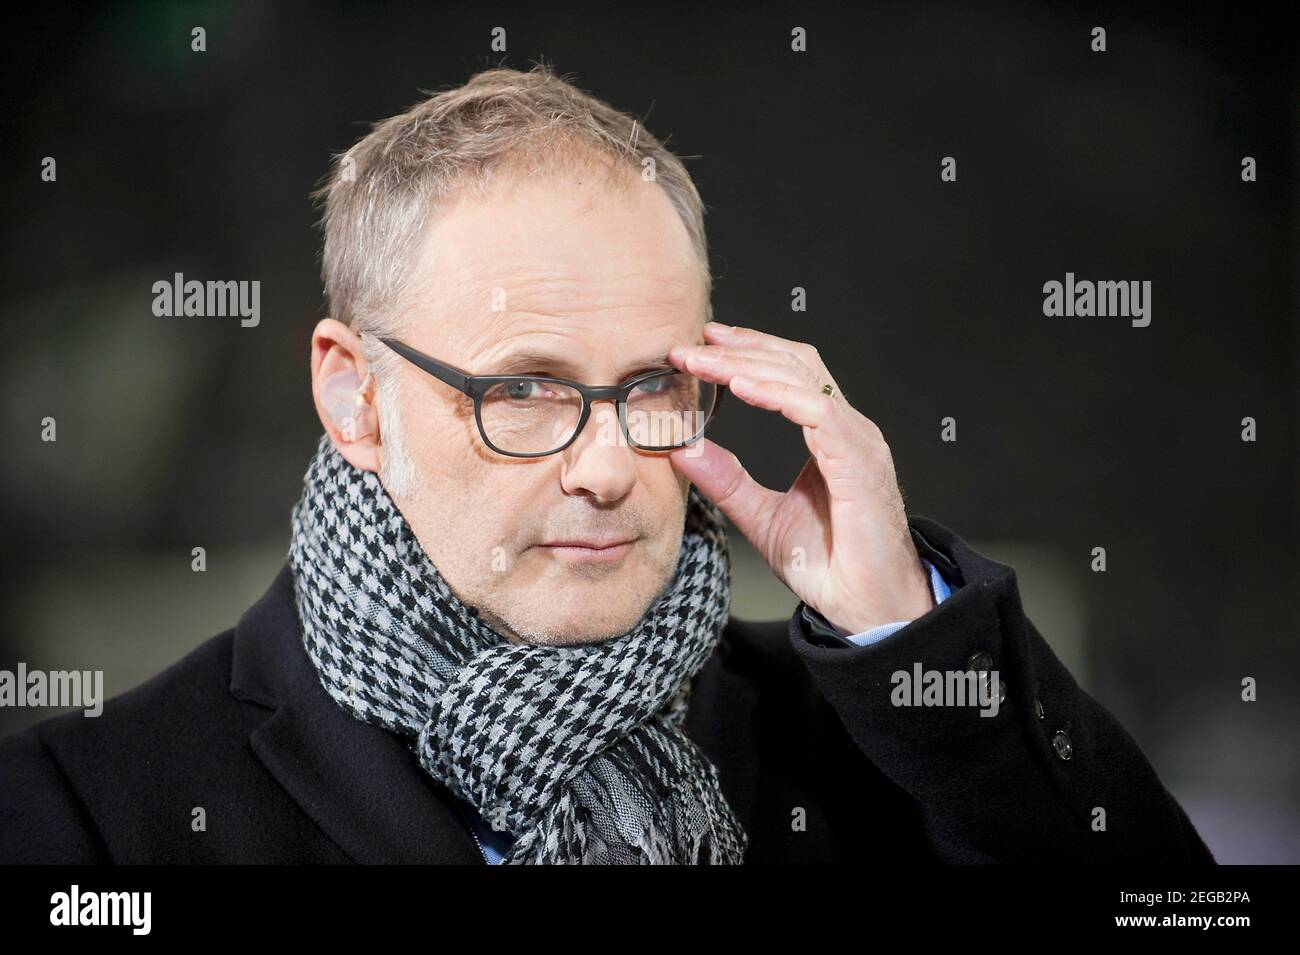 Reinhold BECKMANN will be 65 years old on February 23, 2021, Reinhold BECKMANN, Germany, presenter, TV, television, portrait, ARD, almost on his glasses, gesture, gesture, Soccer 1. Bundesliga, matchday 18, Borussia Monchengladbach (MG) - FC Bayern Munich (M) 3: 1, on January 20, 2012 in Borussia Monchengladbach/Germany Â | usage worldwide Stock Photo